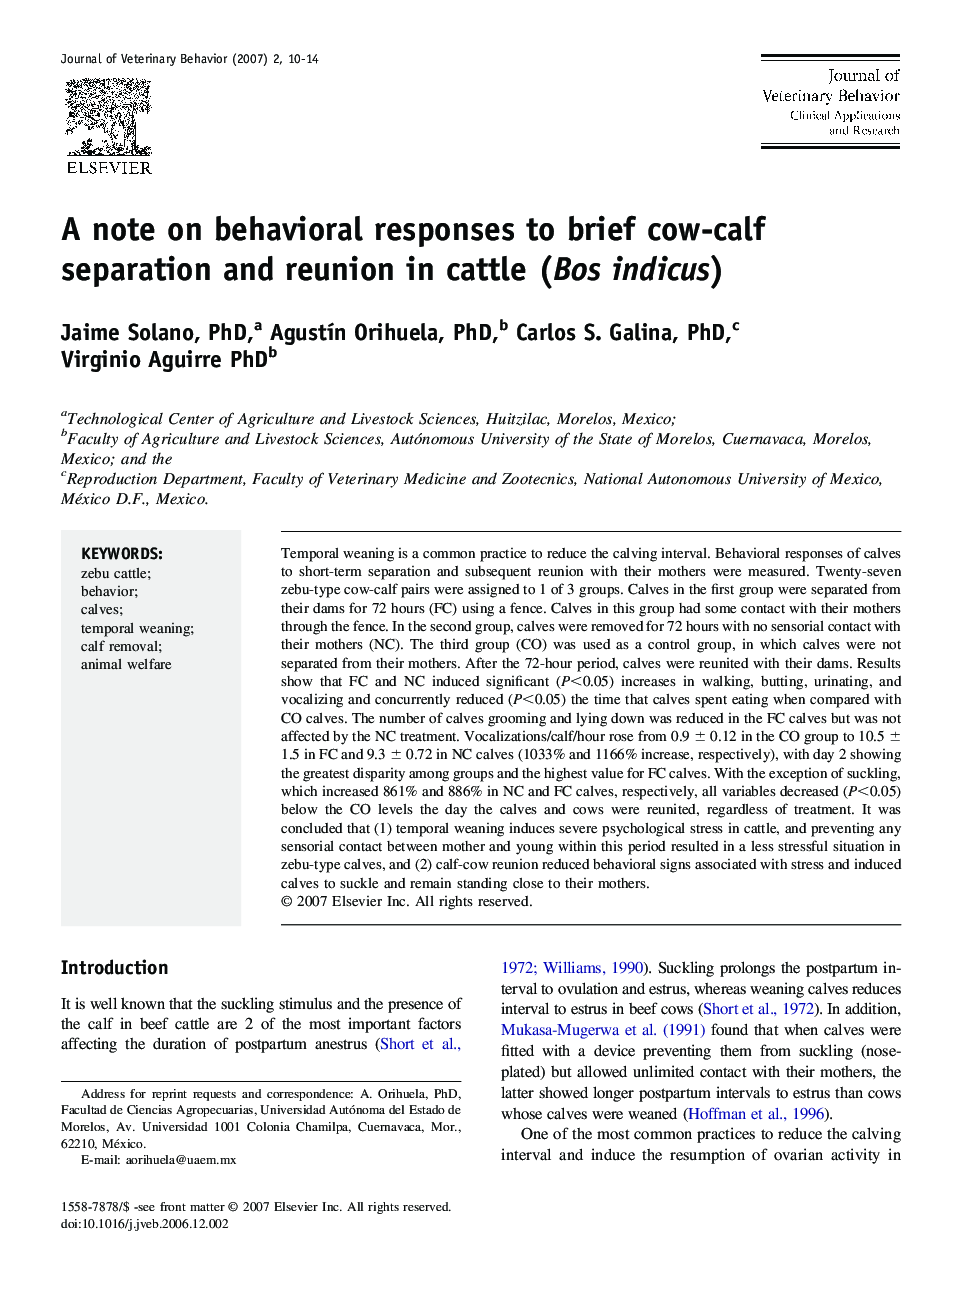 A note on behavioral responses to brief cow-calf separation and reunion in cattle (Bos indicus)